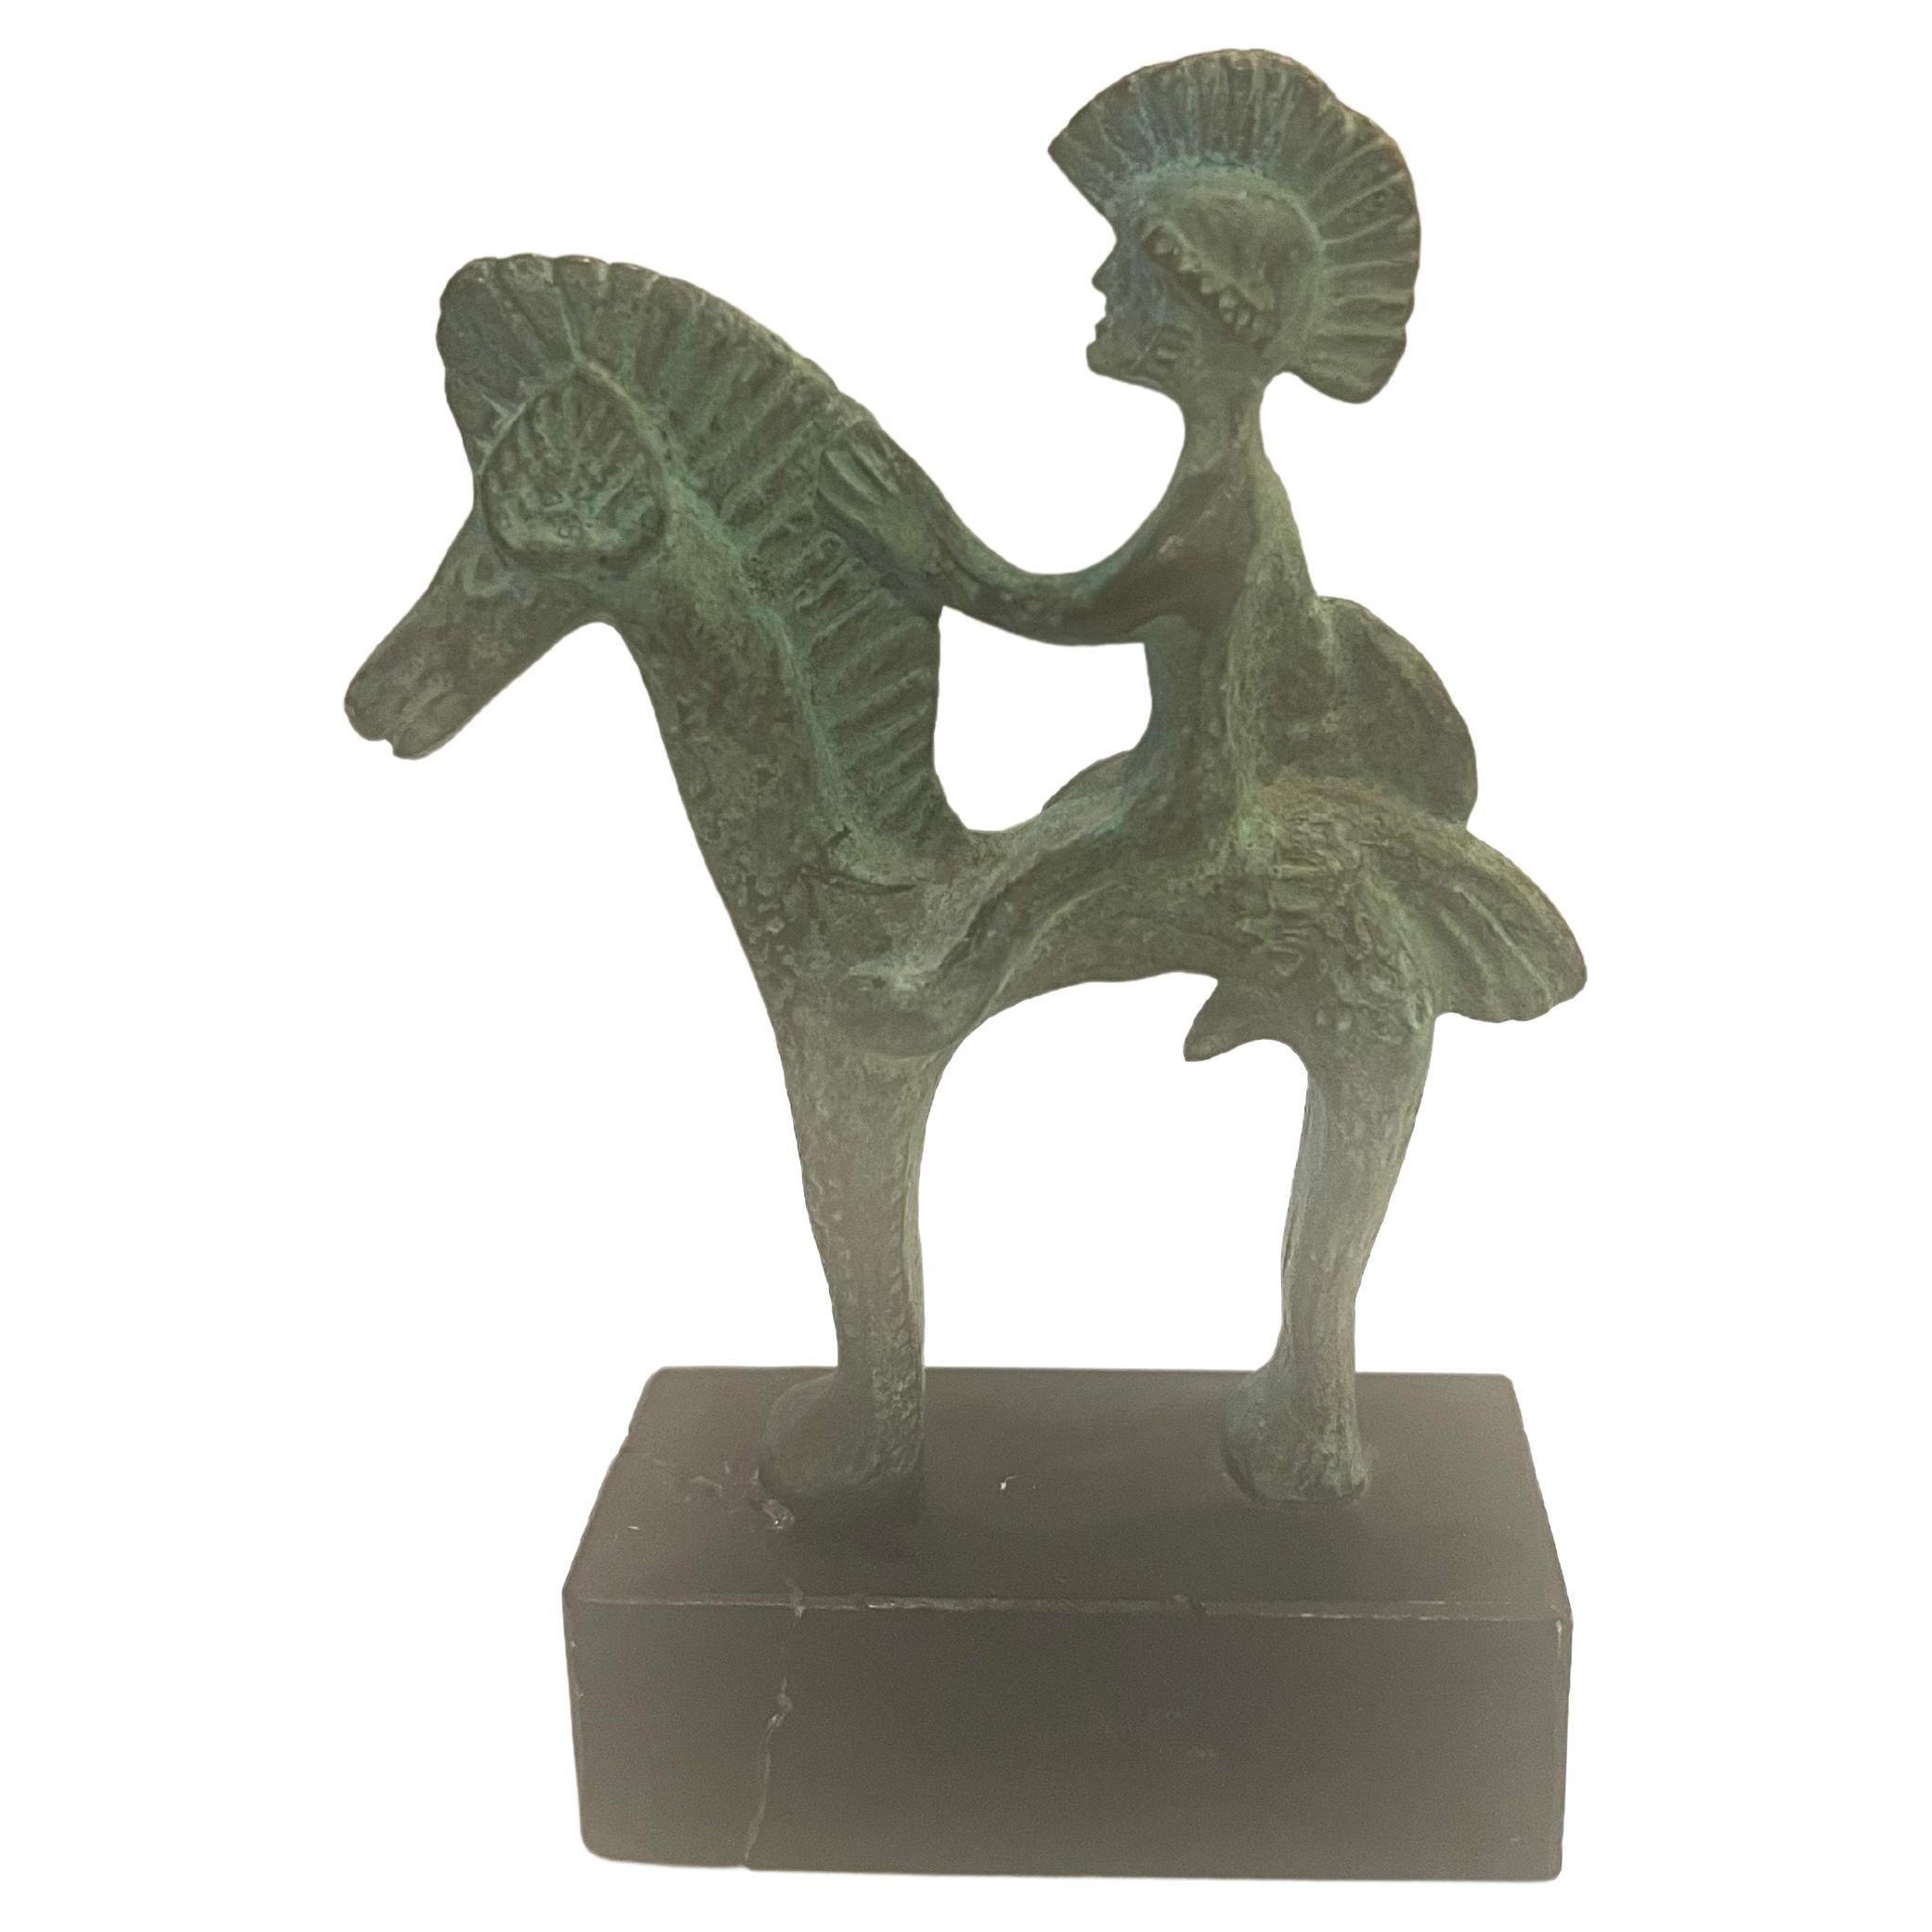 A small Etruscan bronze statue circa the 1970s made in Italy mounted in a black stone base the base shows a crack and repair it can easily be replaced or leave it as is, the bronze sculpture is perfect.